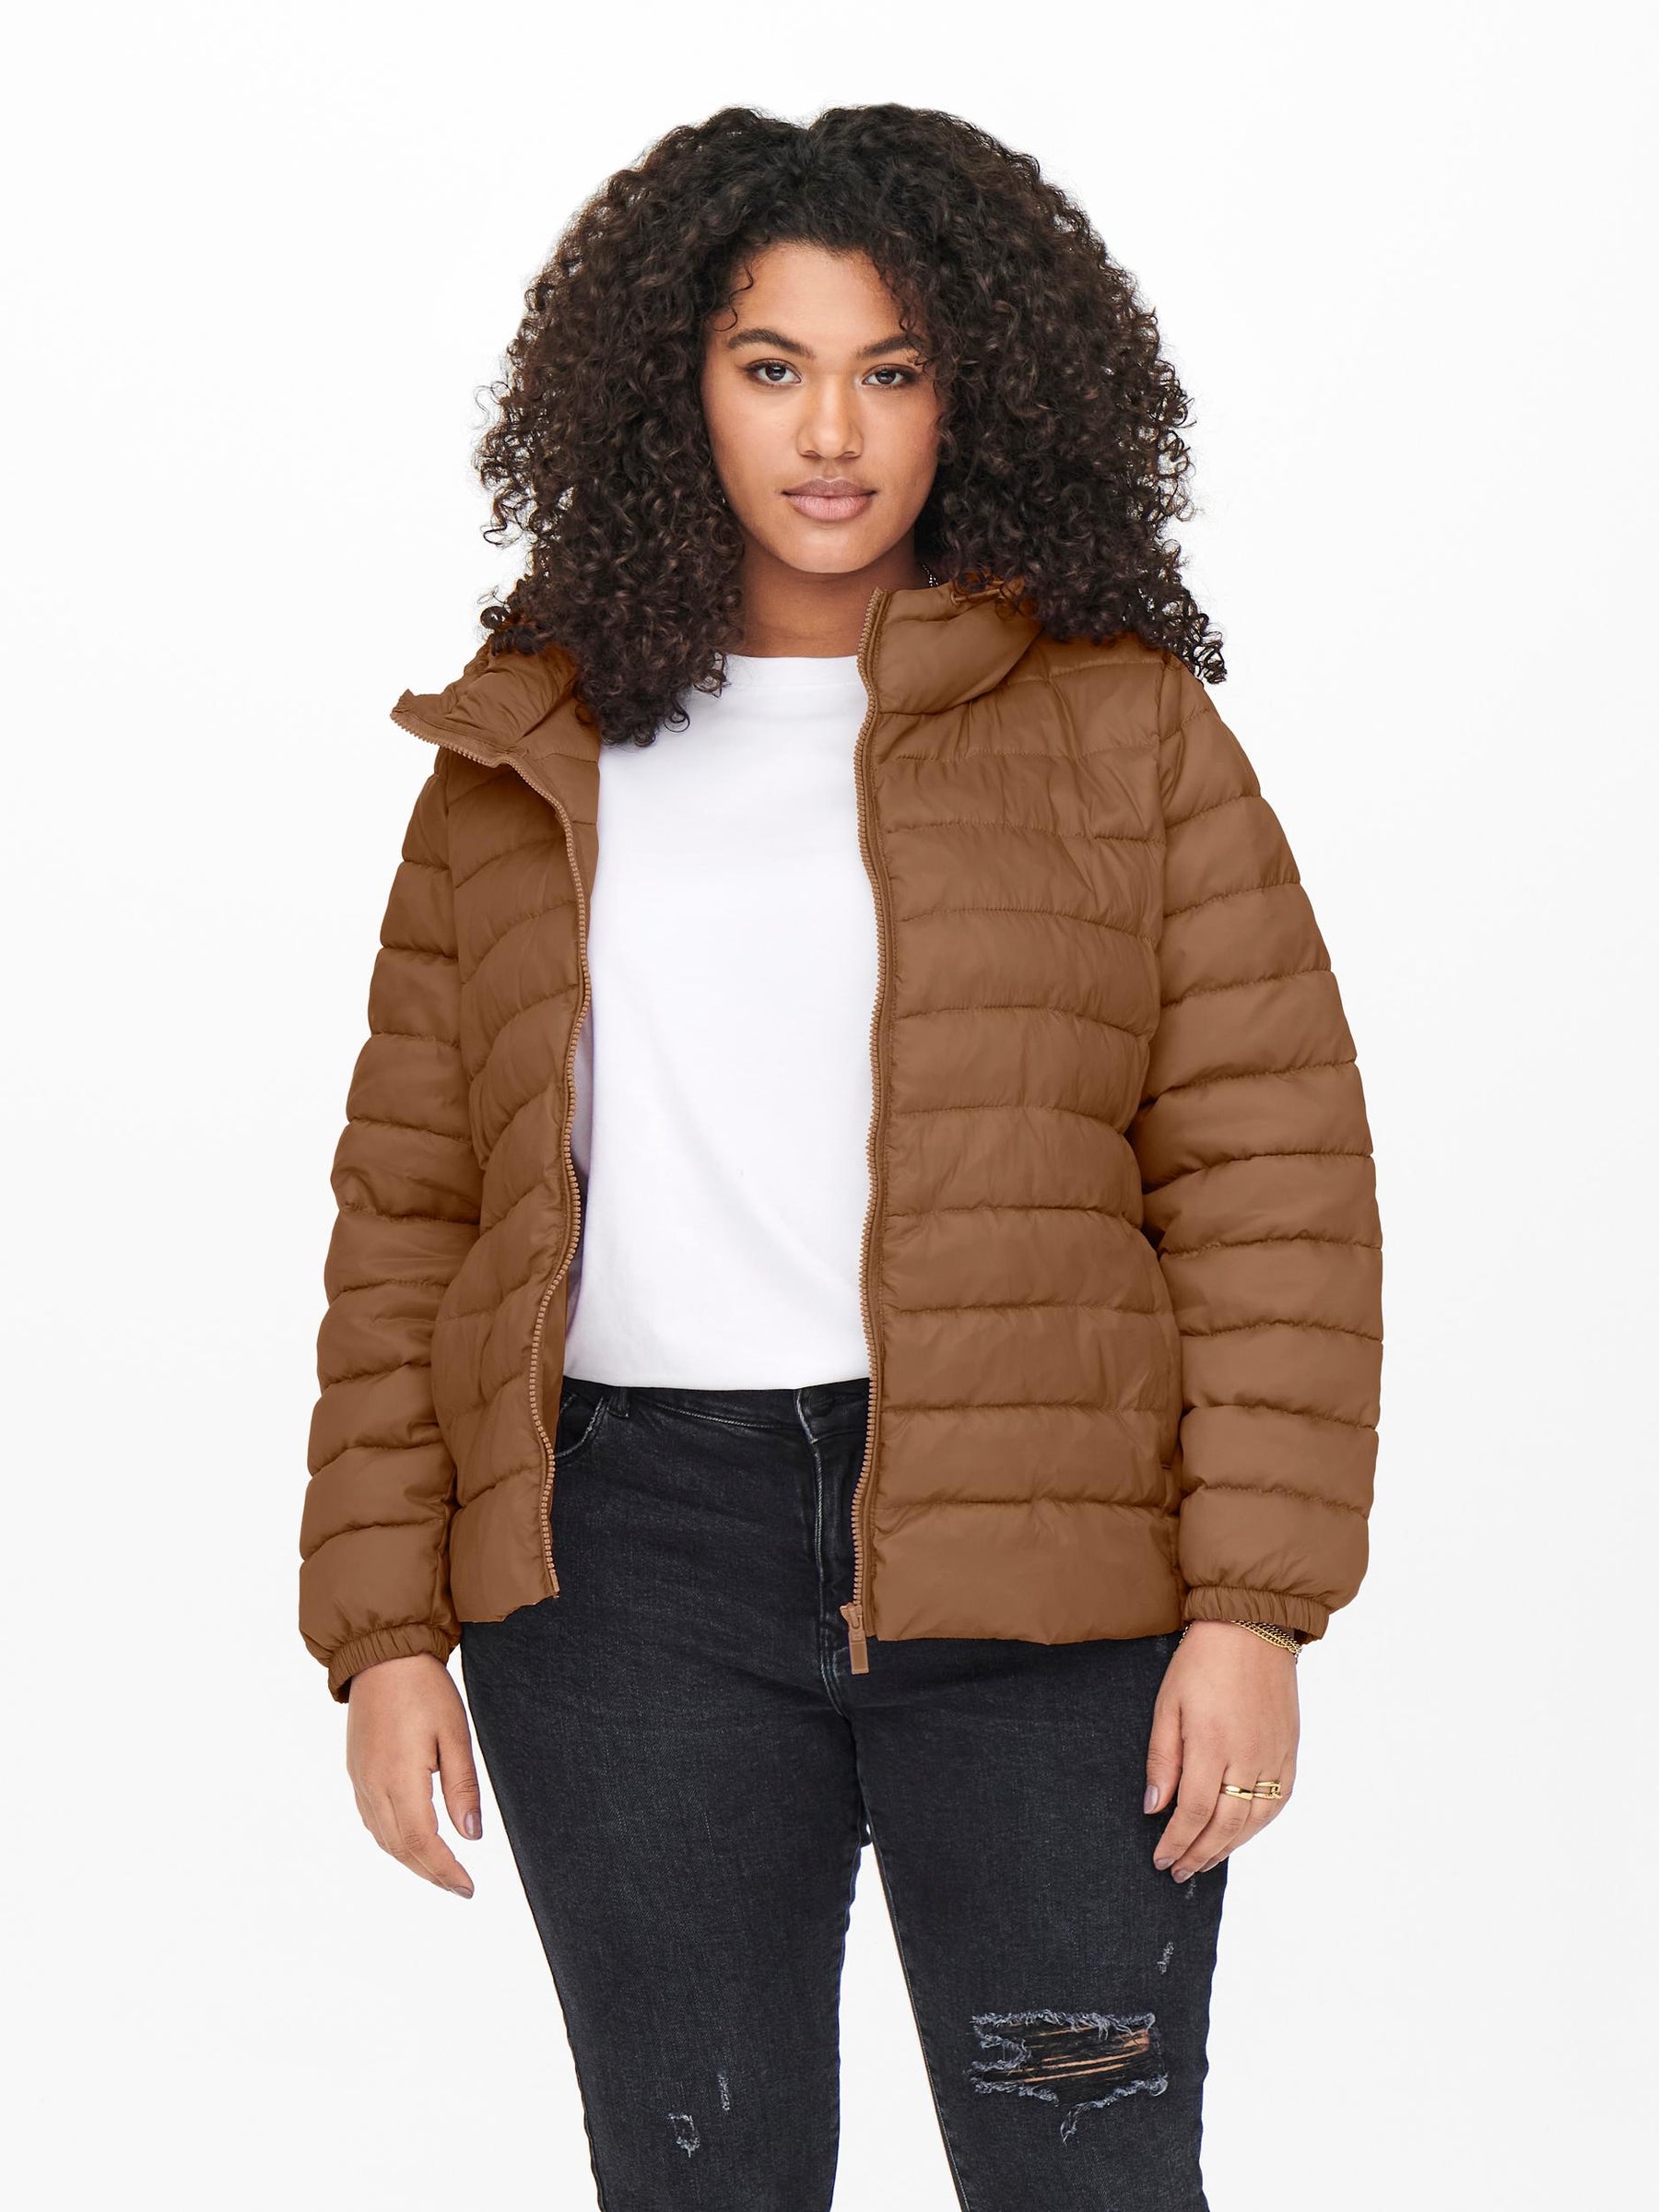 Only Carmakoma Jacket in Brown